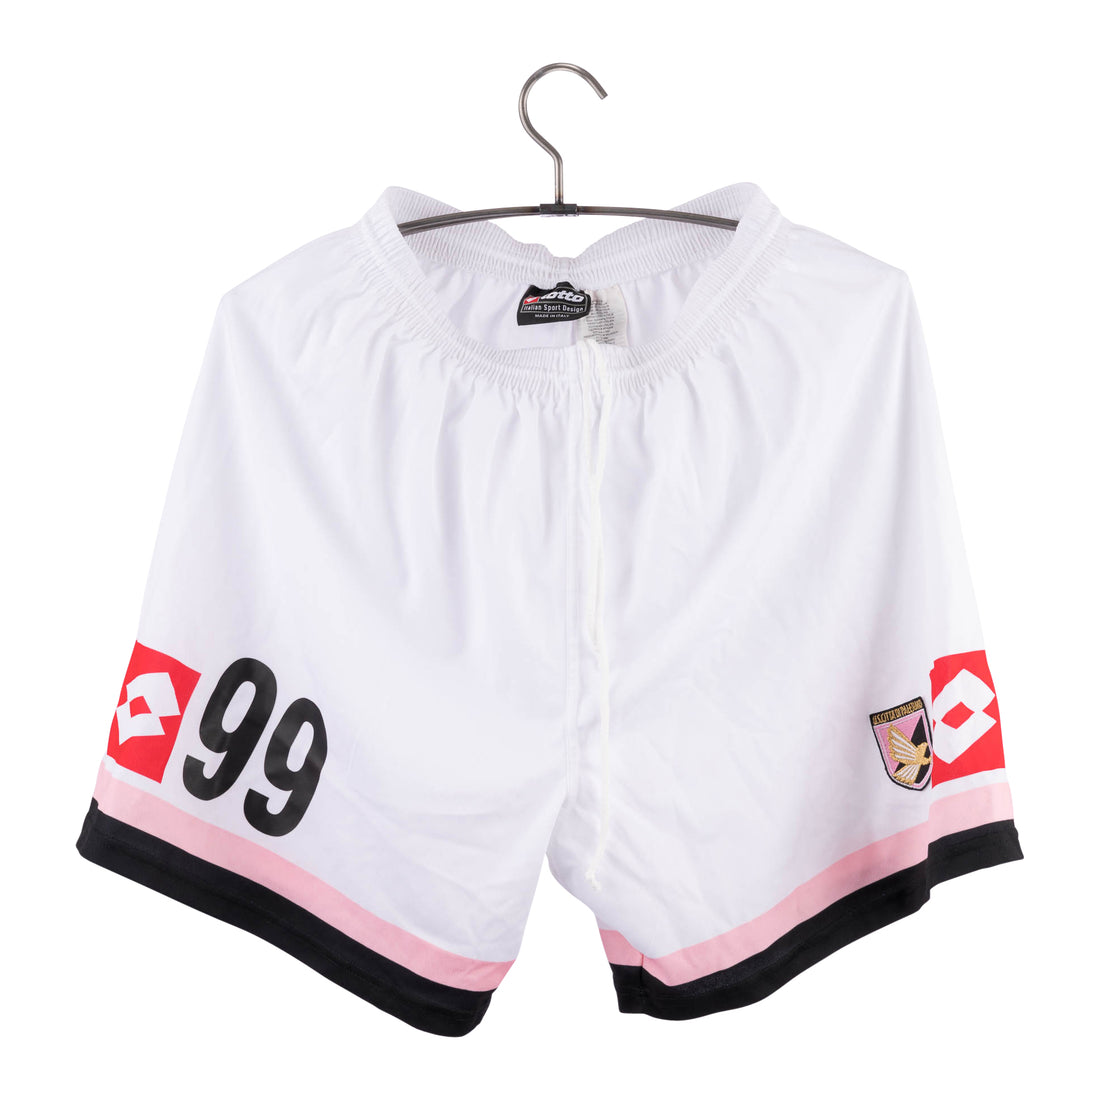 Palermo 2005 - 2006 Player Issue Away Football Shorts #99